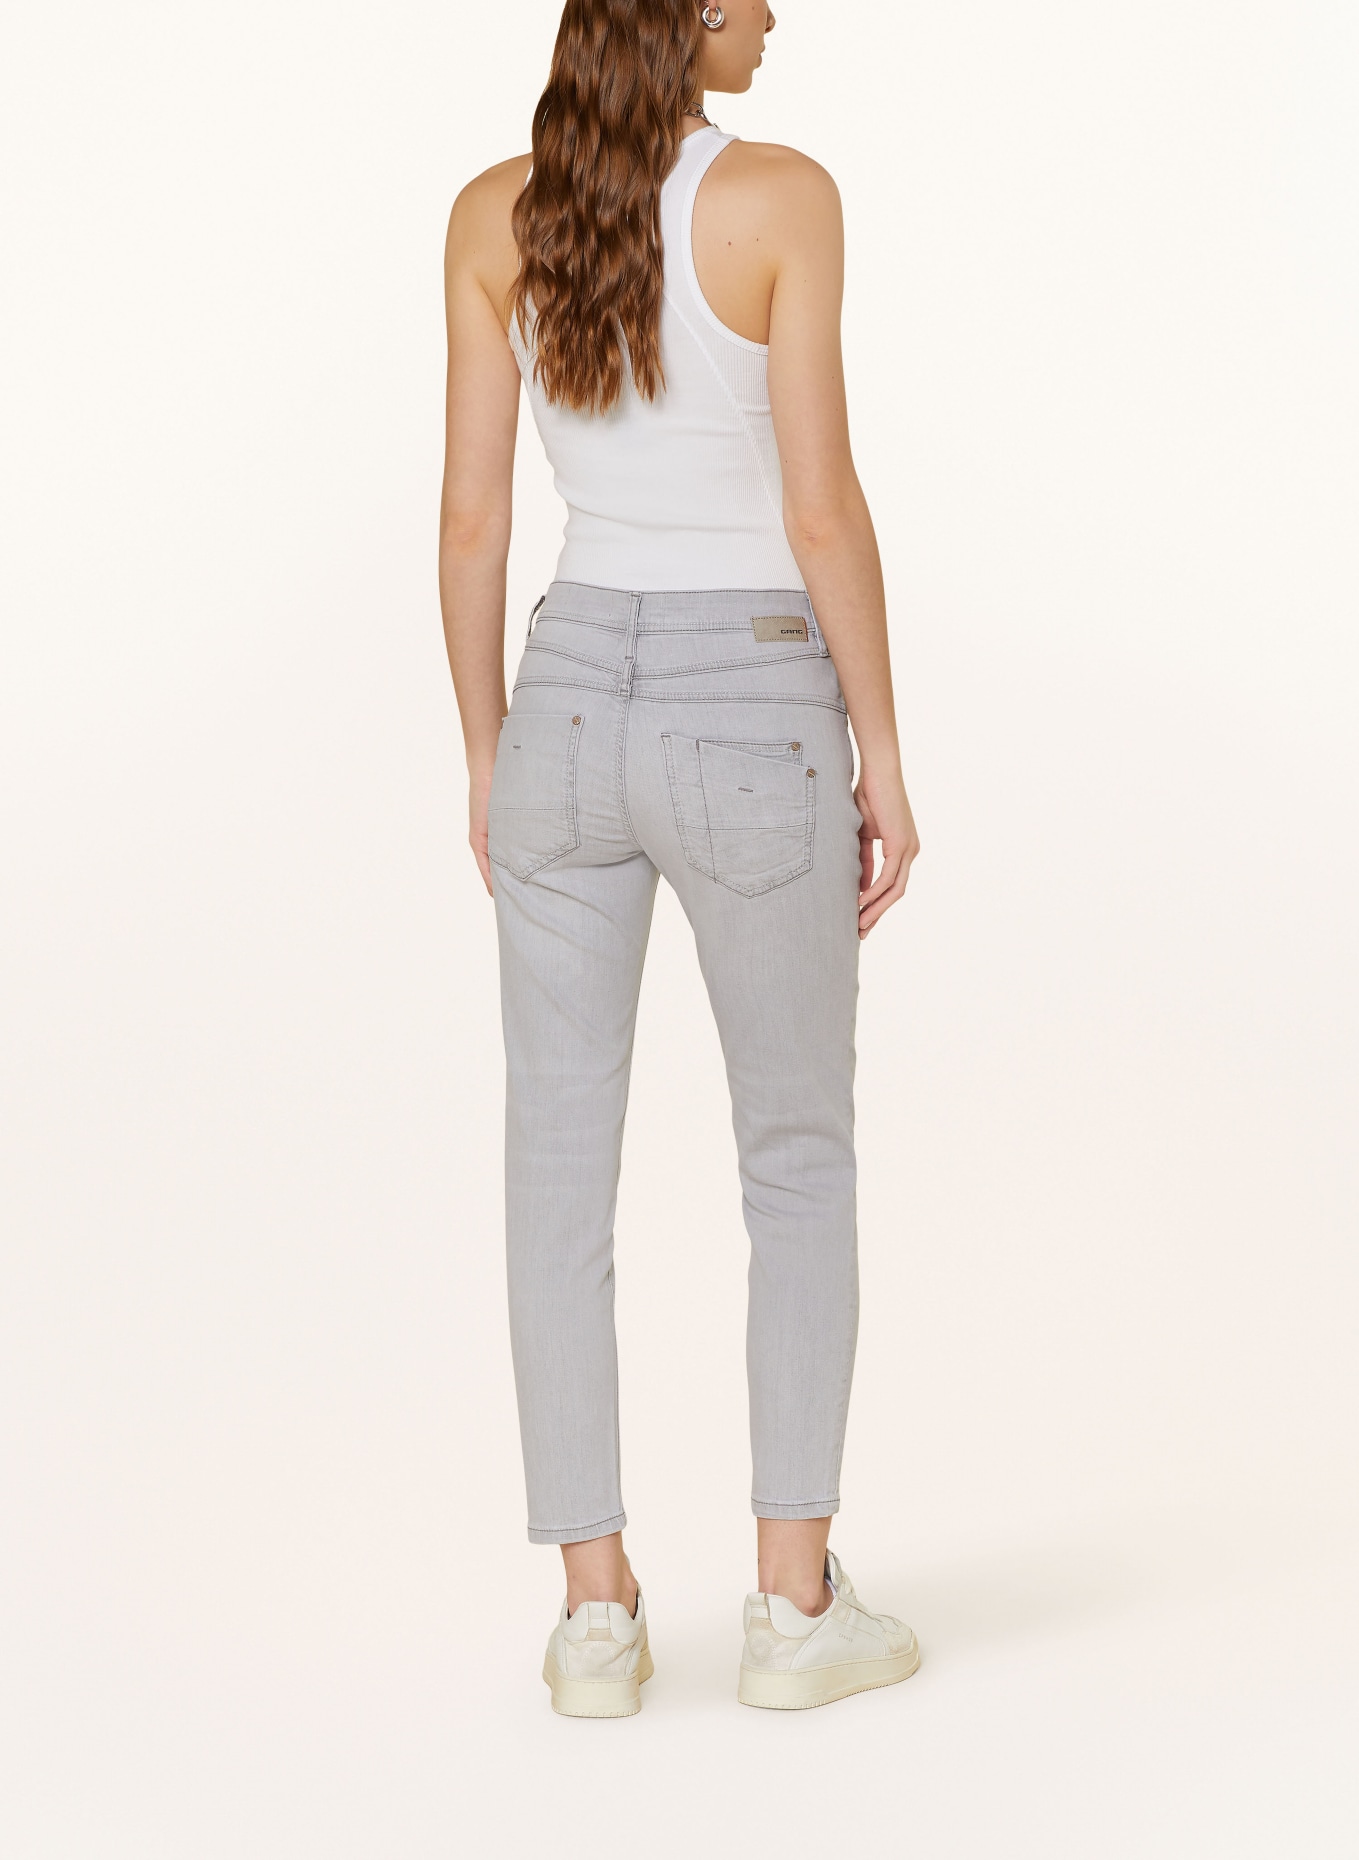 GANG 7/8-Jeans AMELIE CROPPED, Farbe: 7108 clowdy gray (Bild 3)